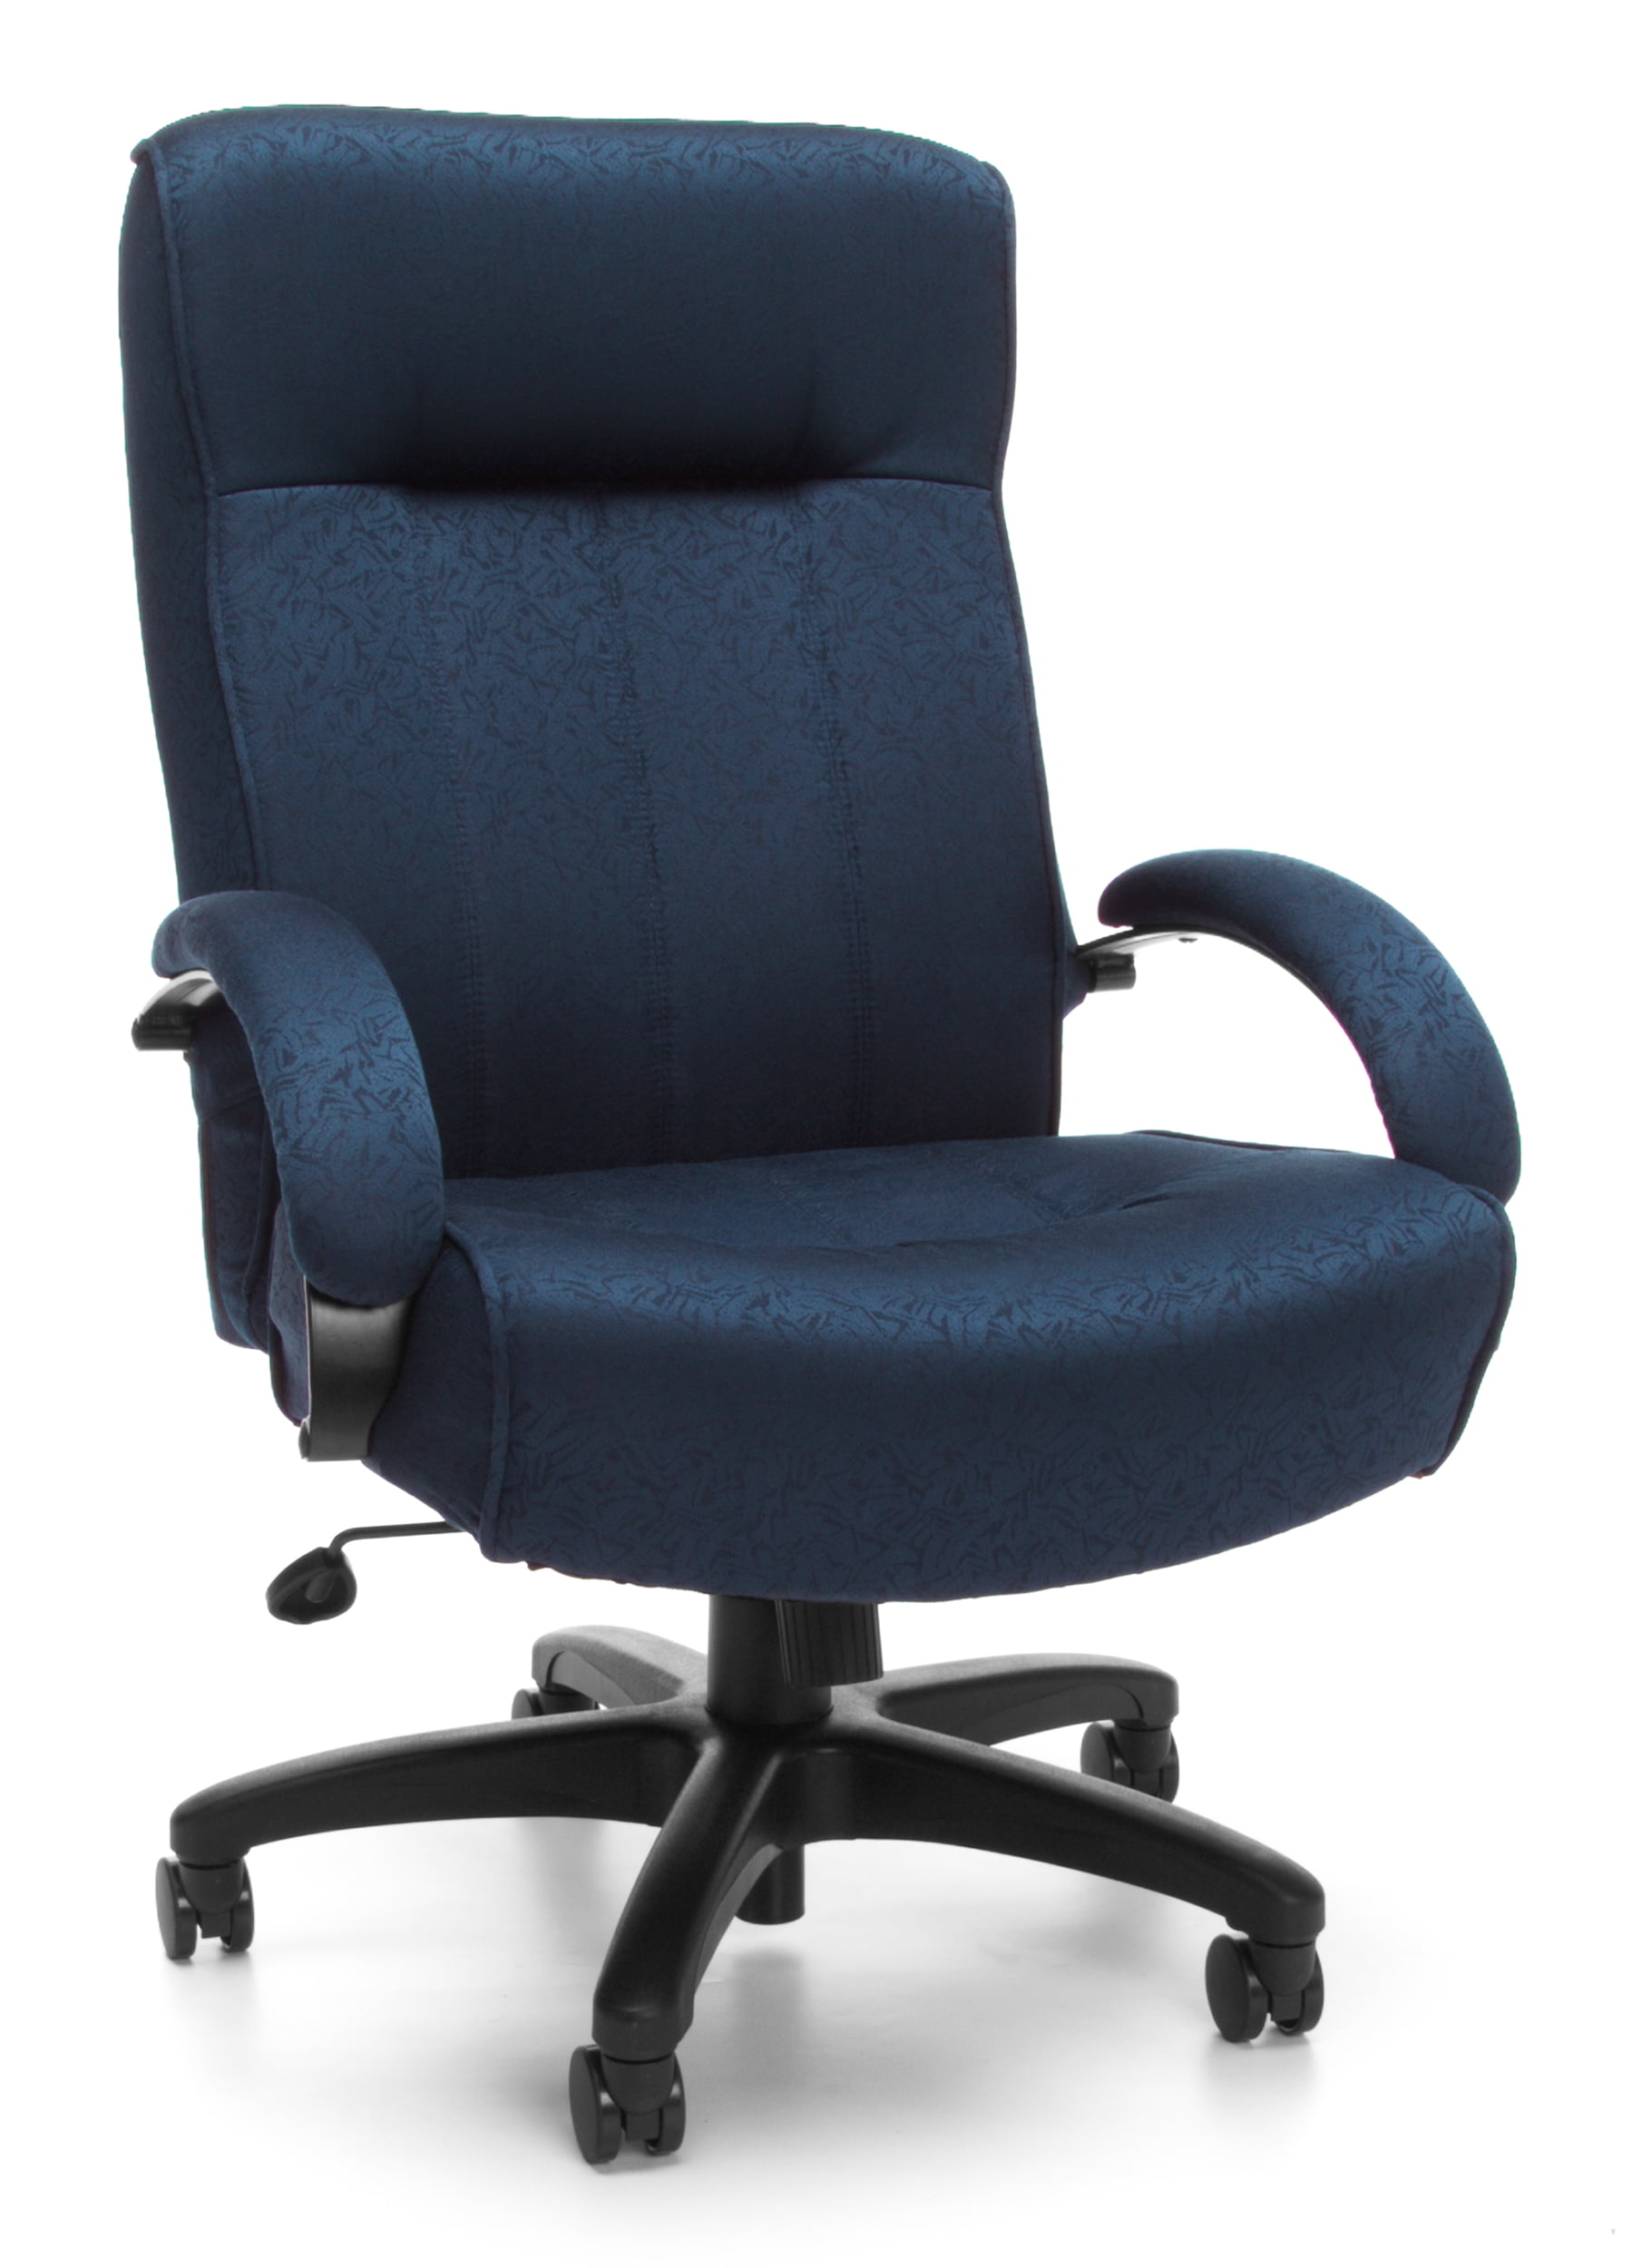 OFM Model 710 Fabric High-Back Big and Tall Executive Chair, Navy